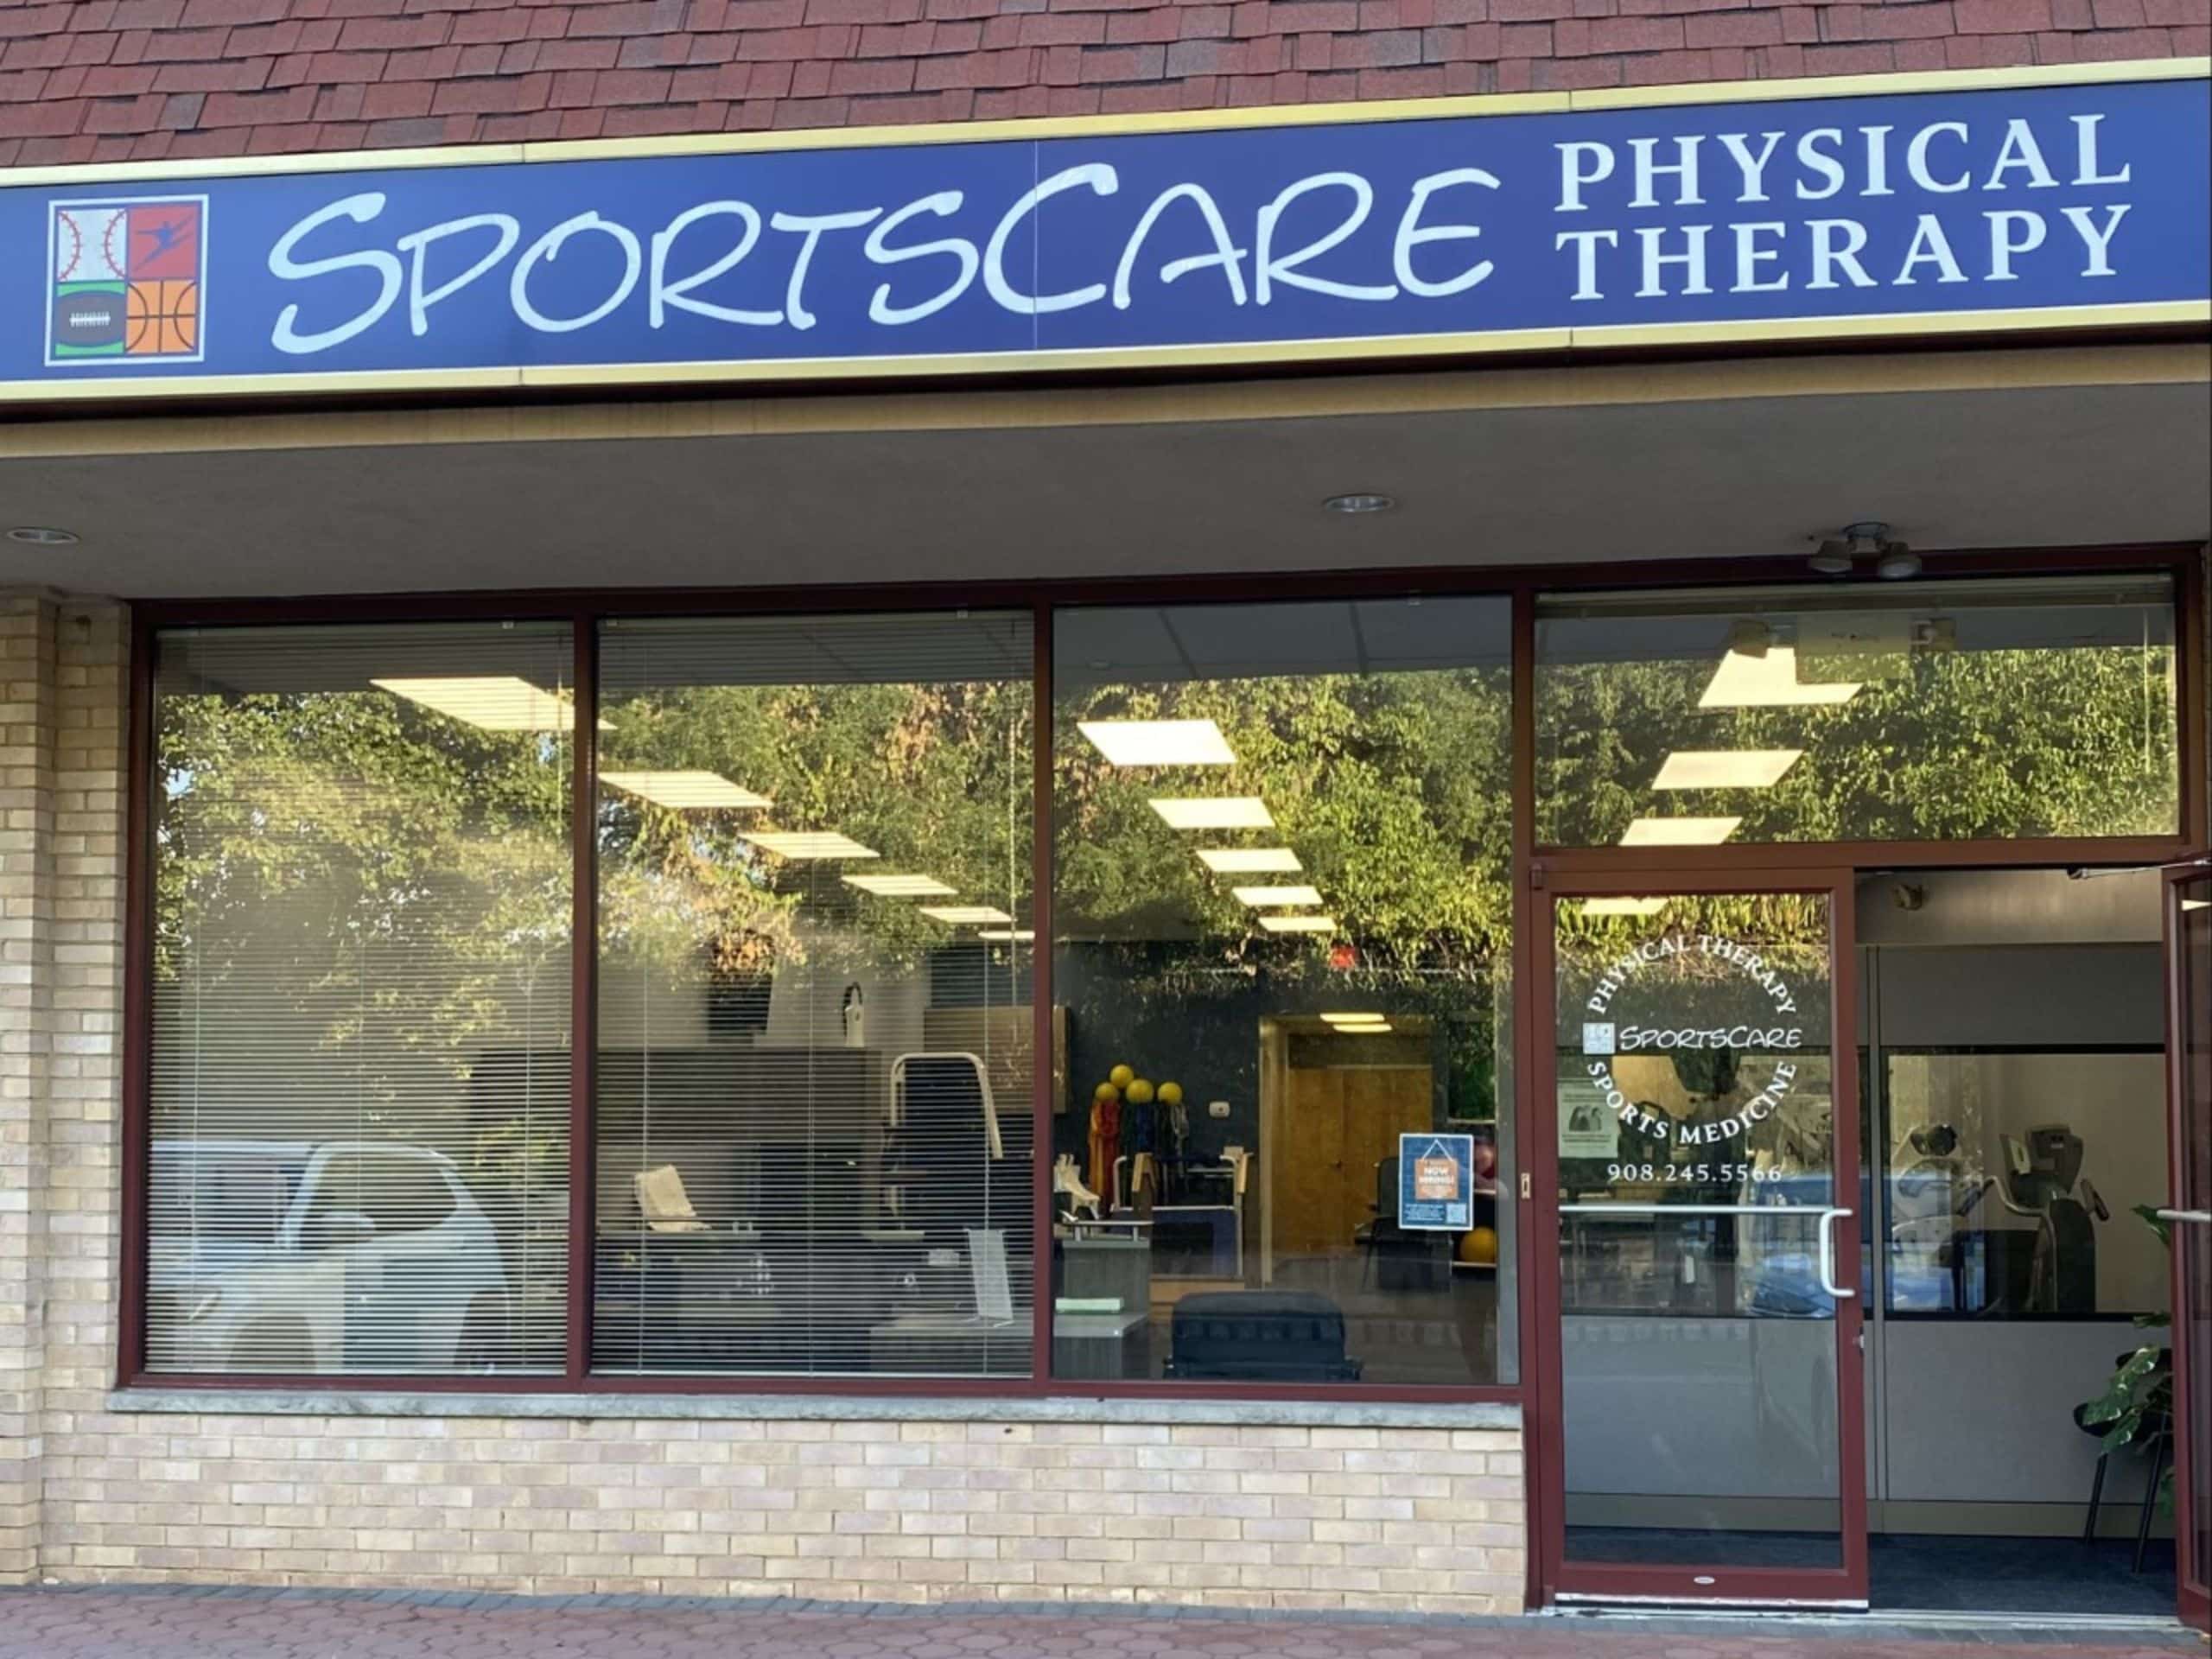 How To Value A Physical Therapy Practice